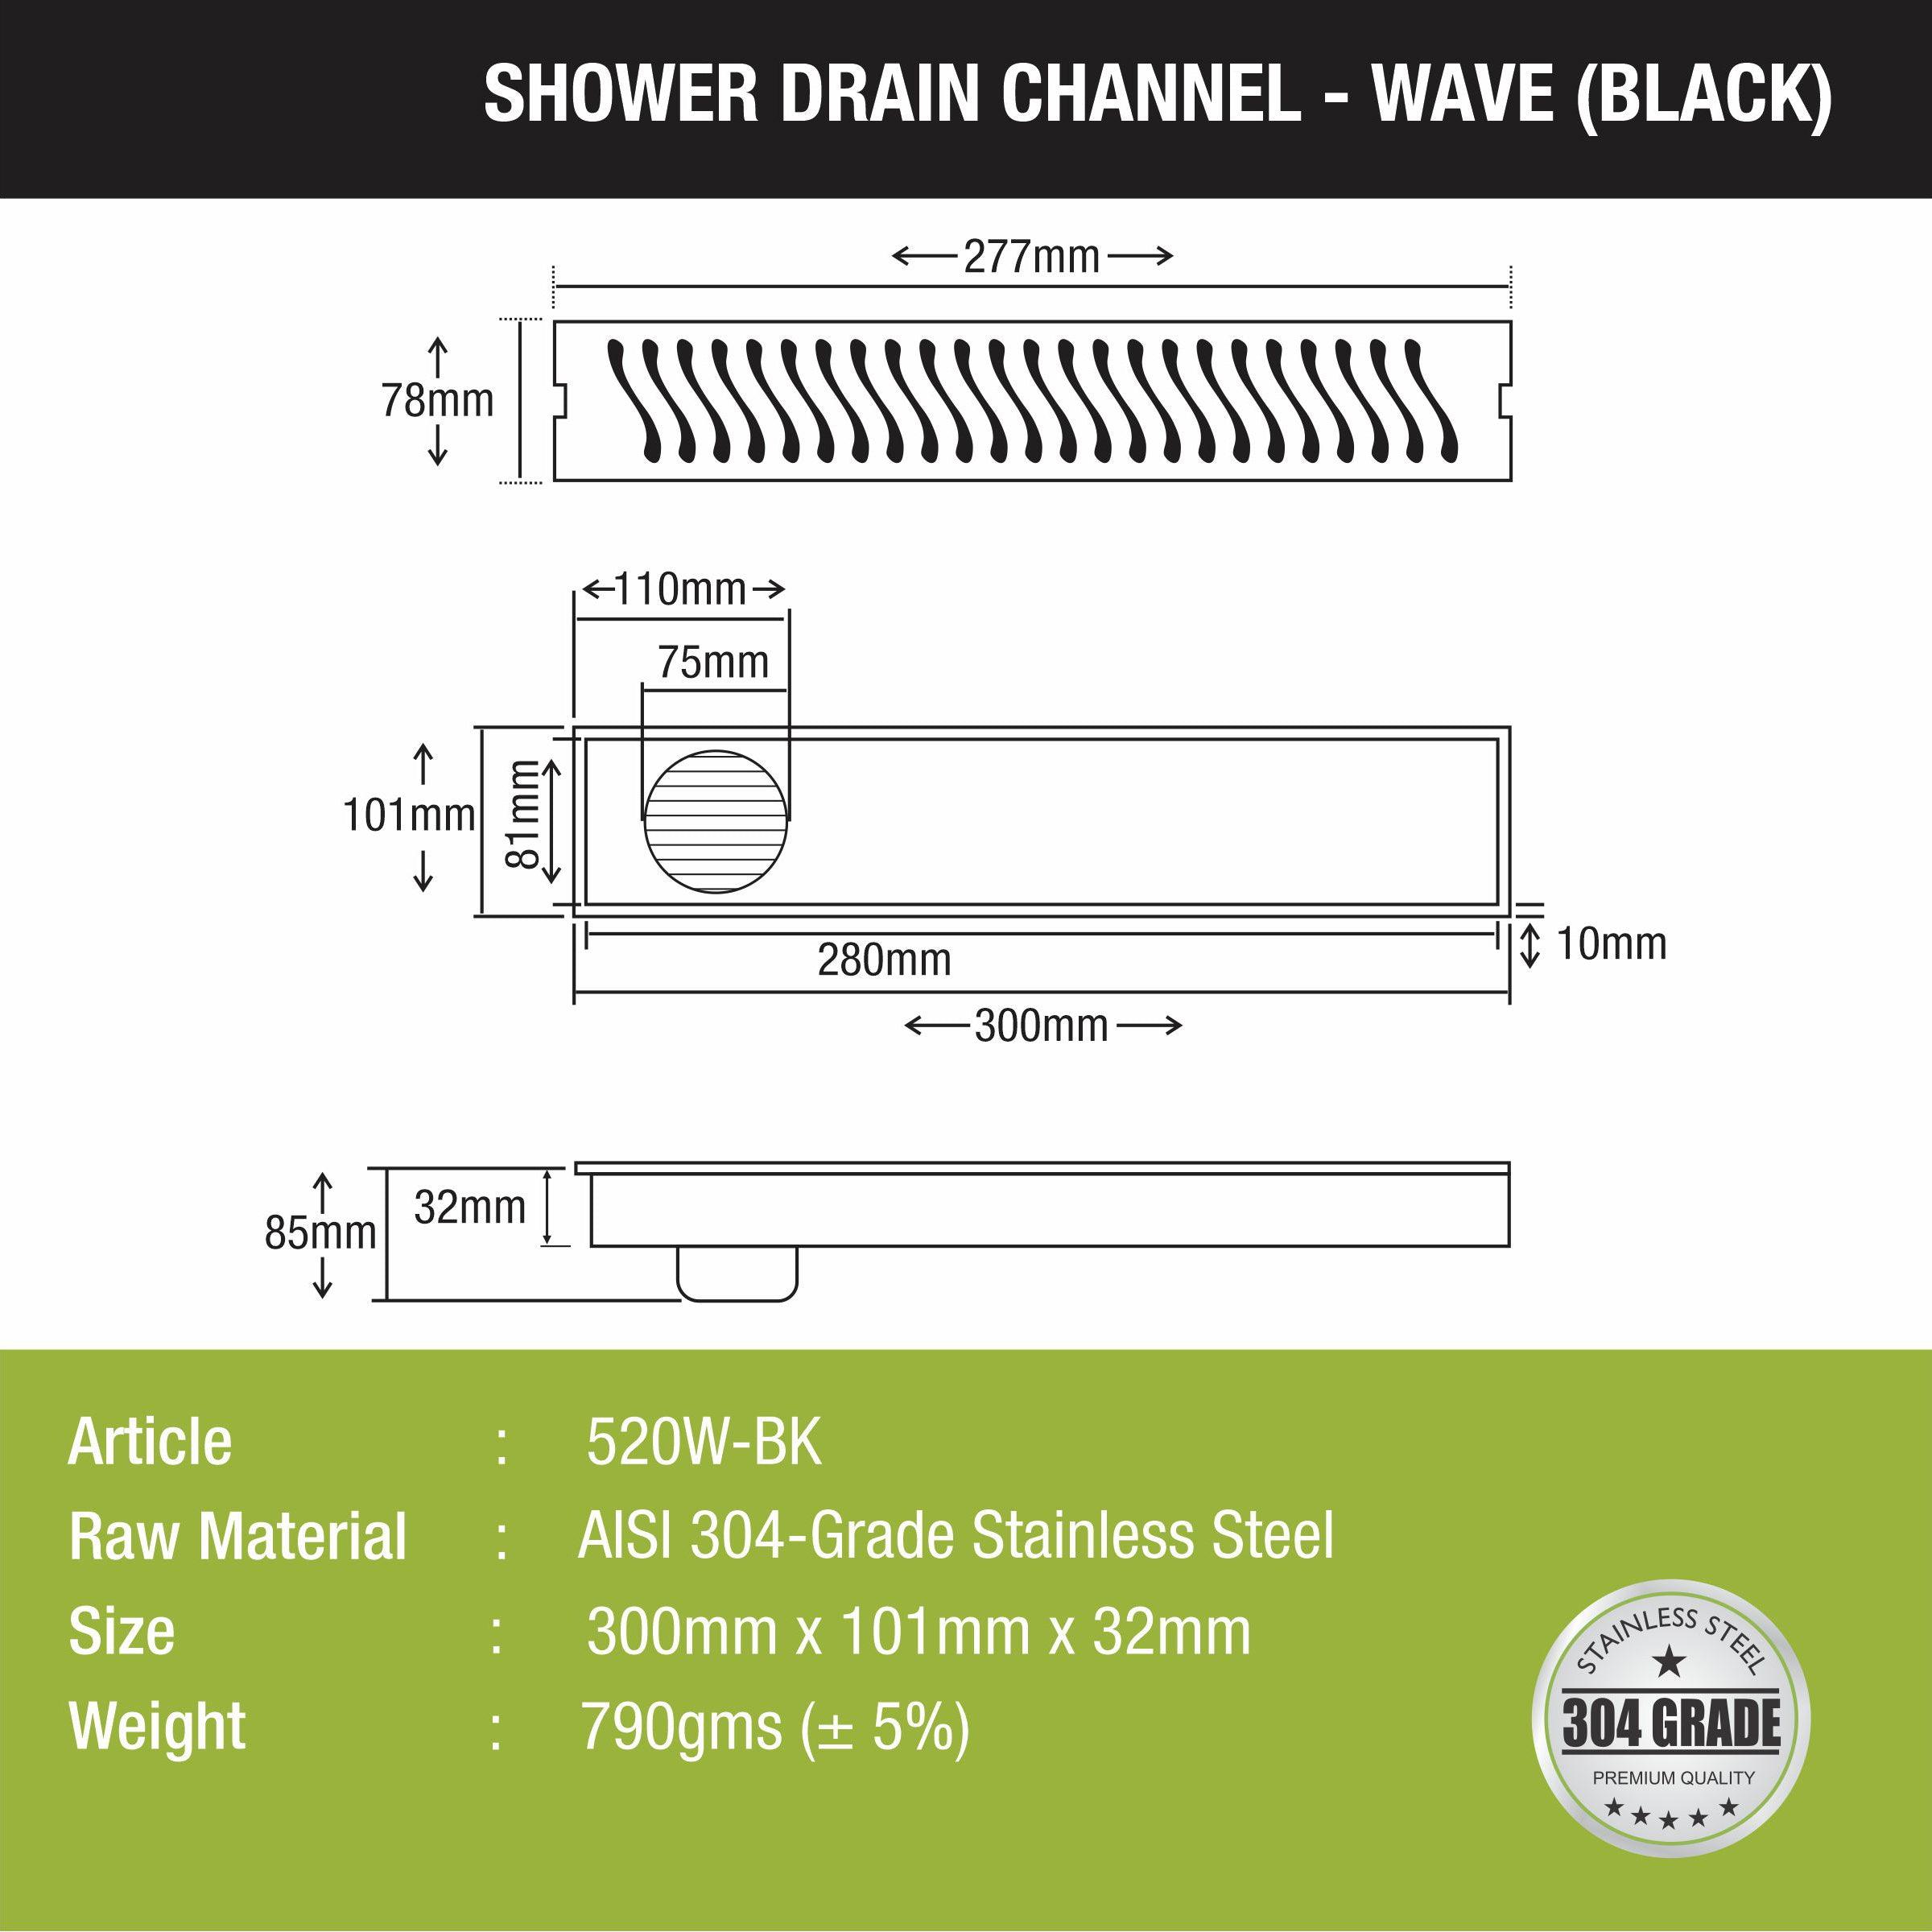 Wave Shower Drain Channel - Black (12 x 4 Inches)size and measurement